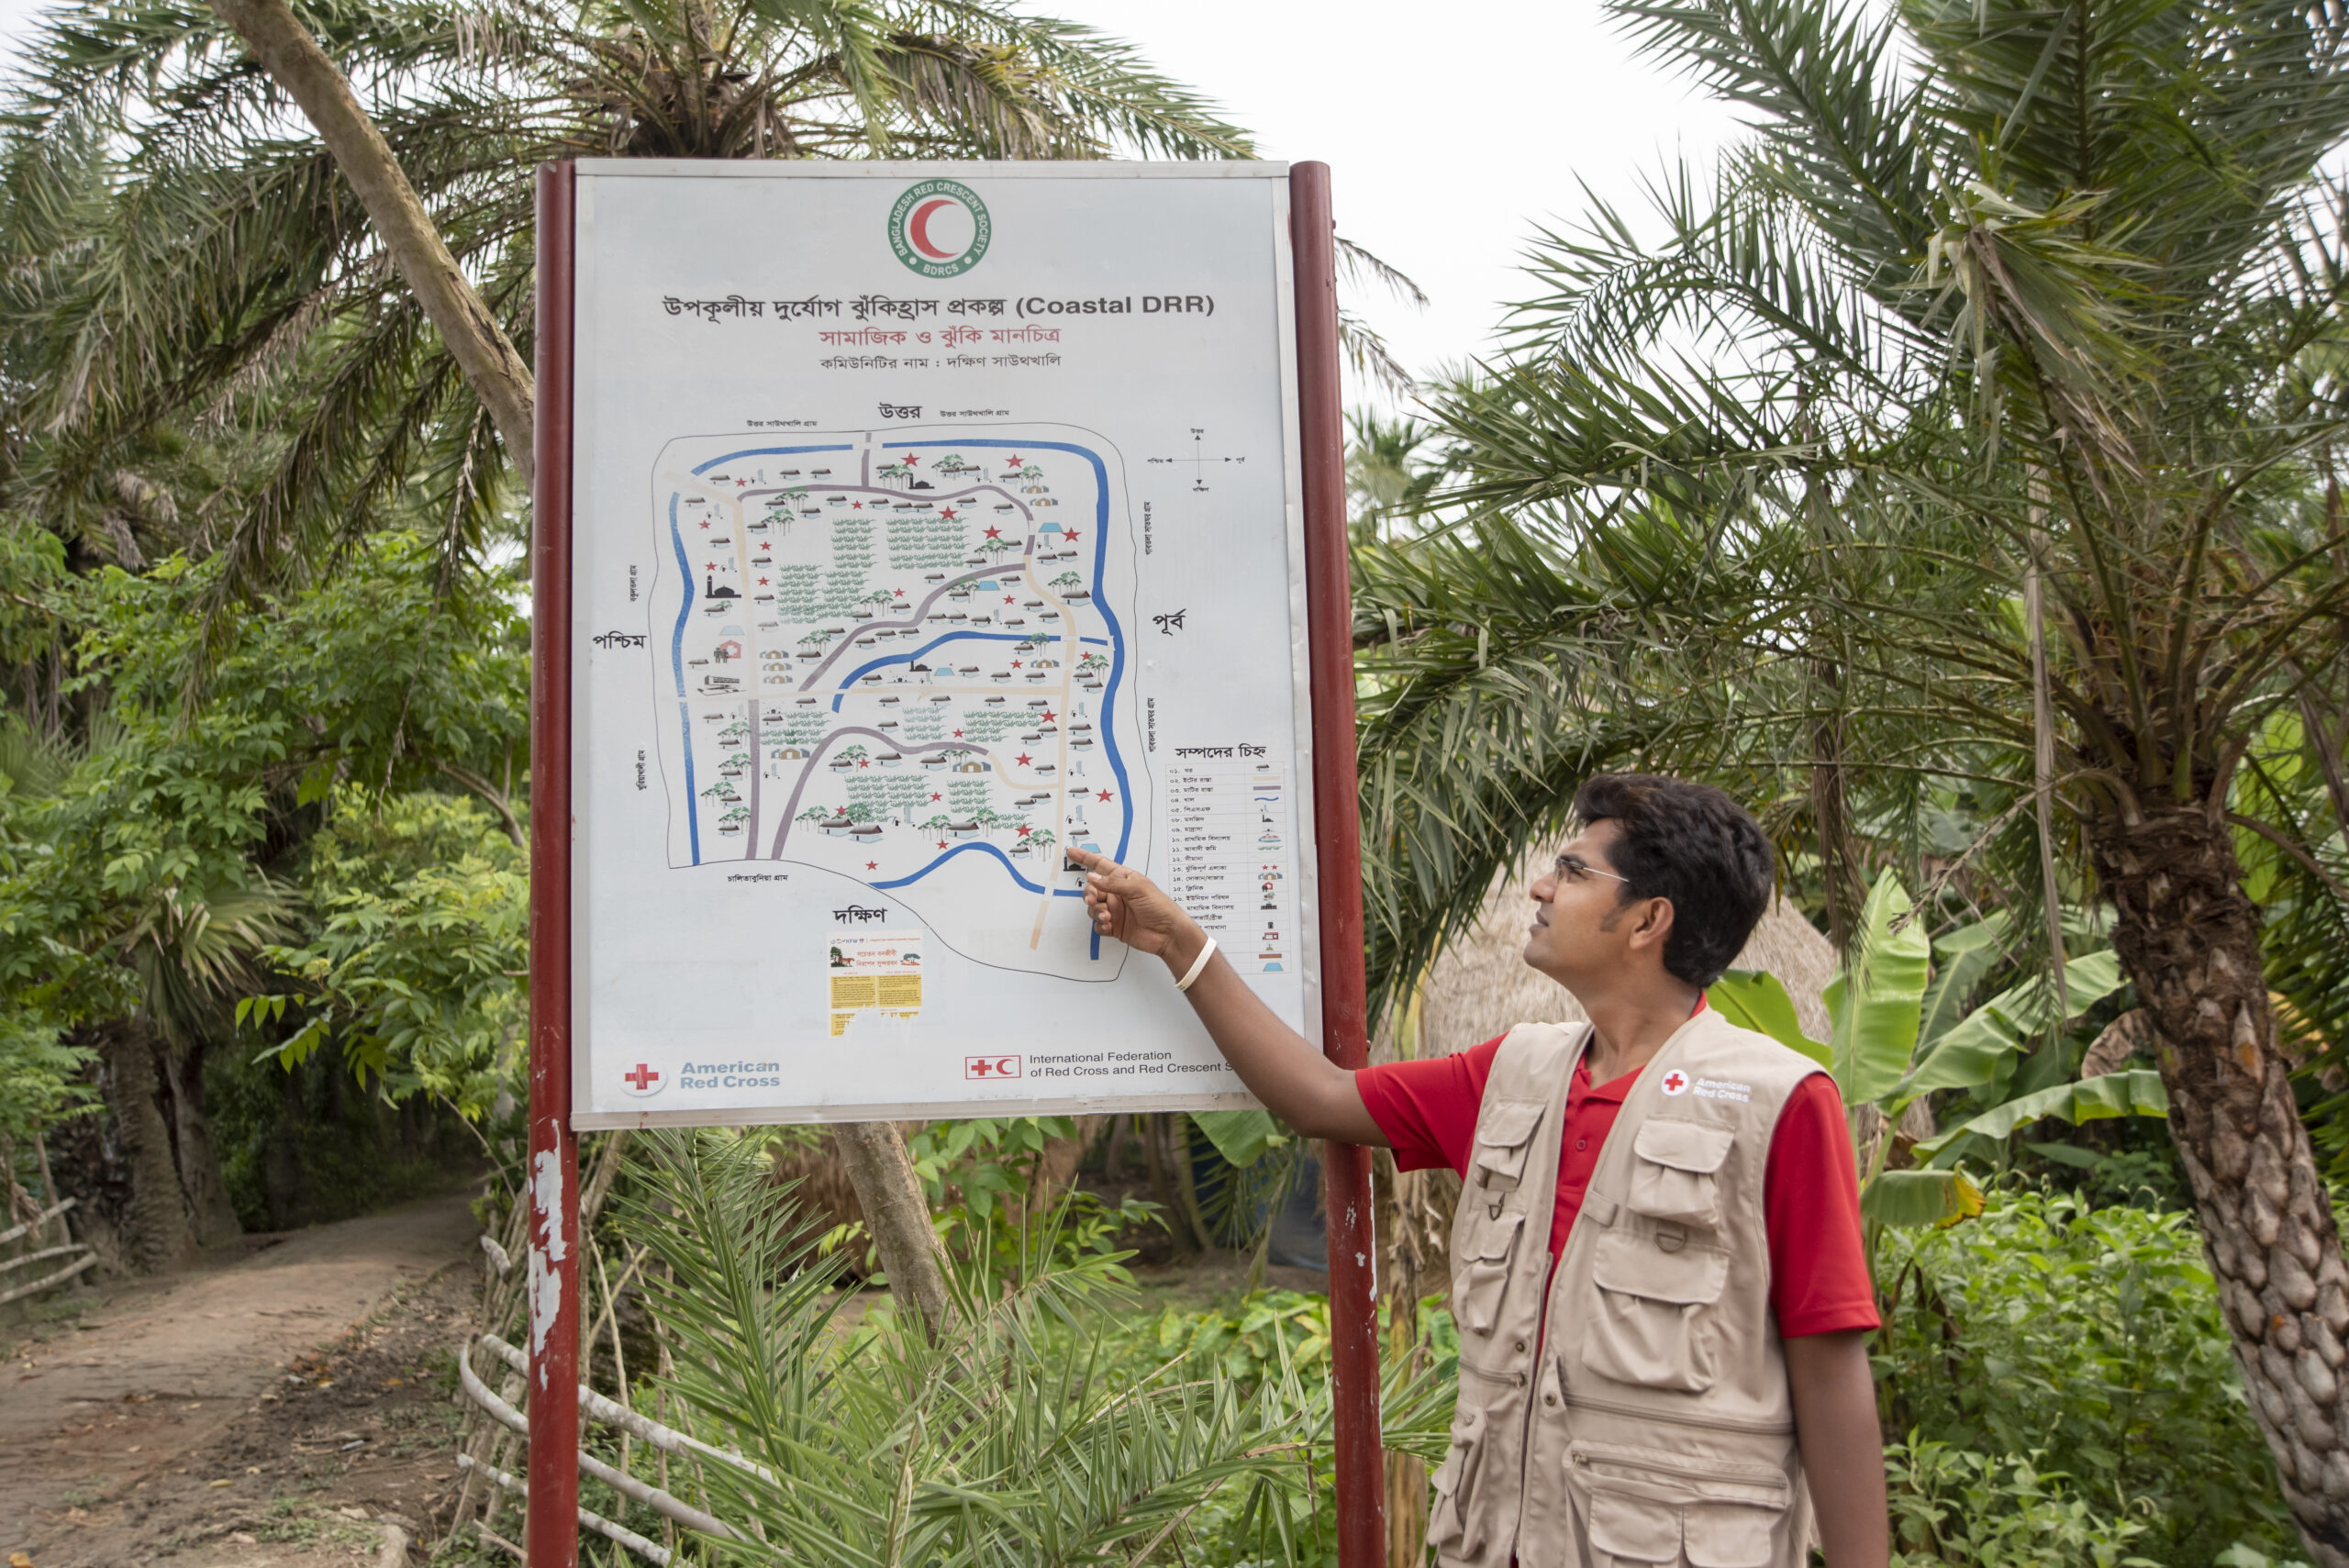 Empowering communities in coastal Bangladesh, the American Red Cross uses open-source mapping to identify hazards, vulnerabilities, and resources. Photo by Brad Zerivitz/American Red Cross. 